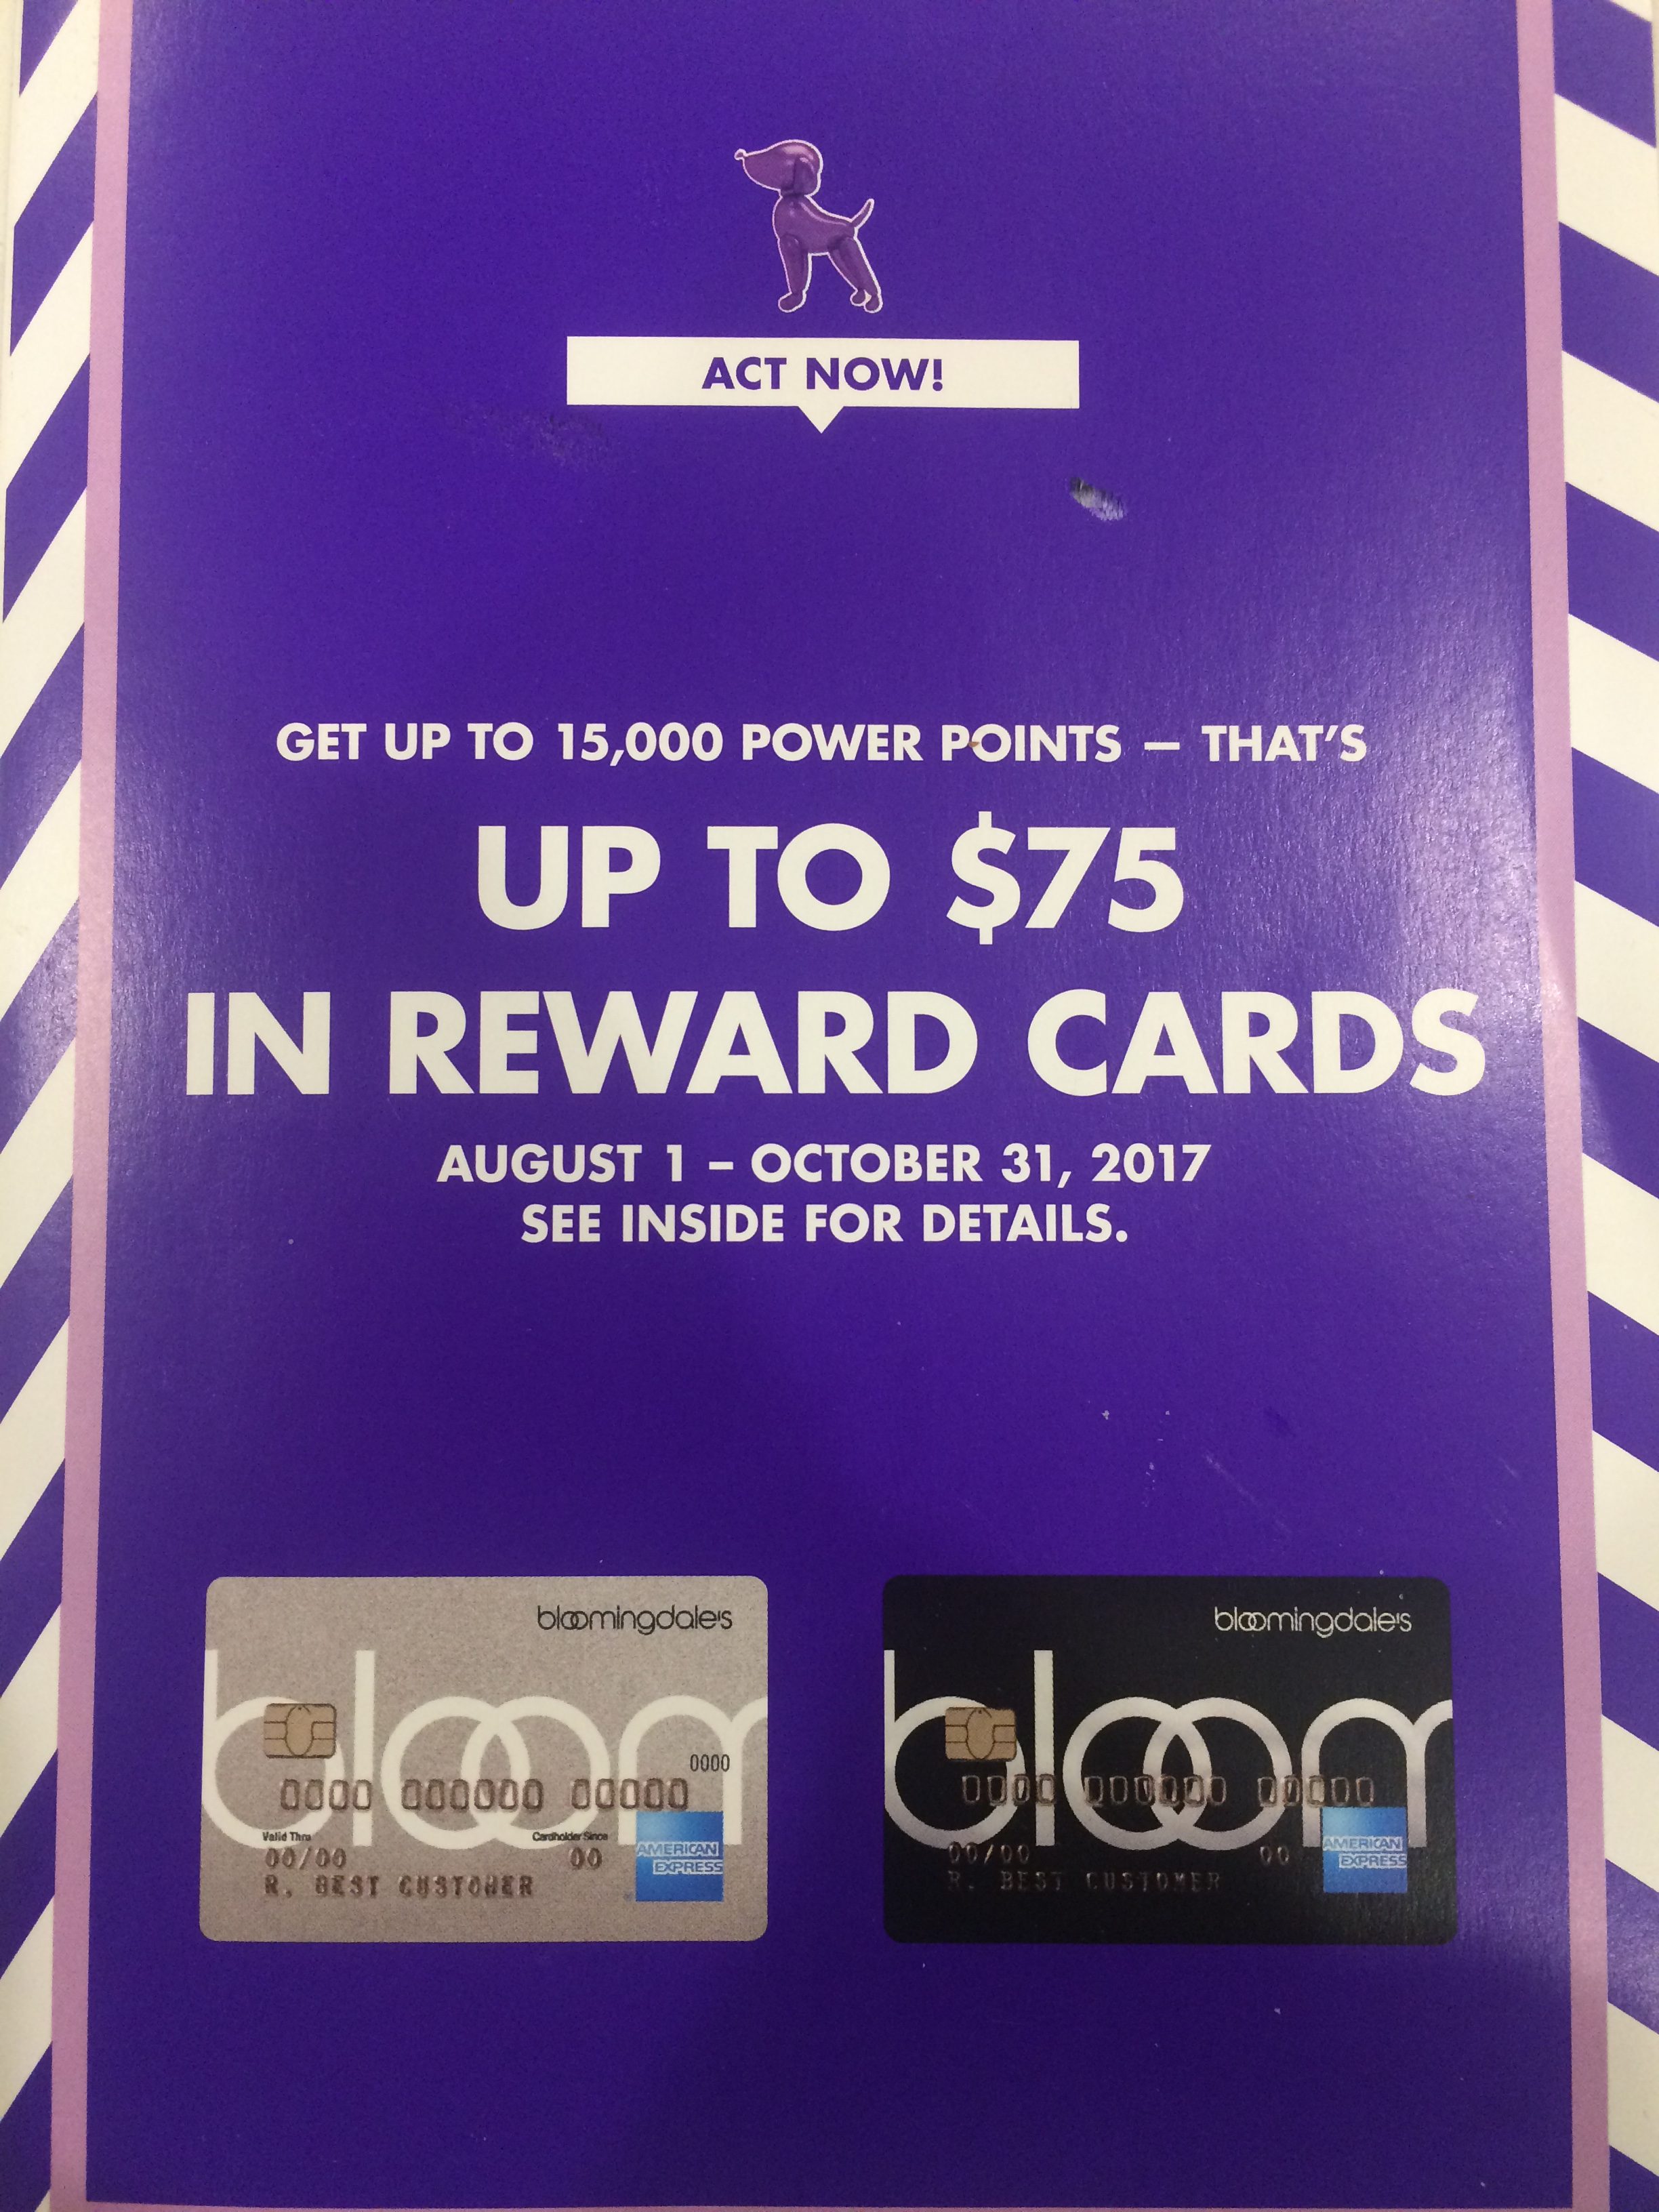 Bloomingdale's American Express® Card Reviews: Is It Any Good